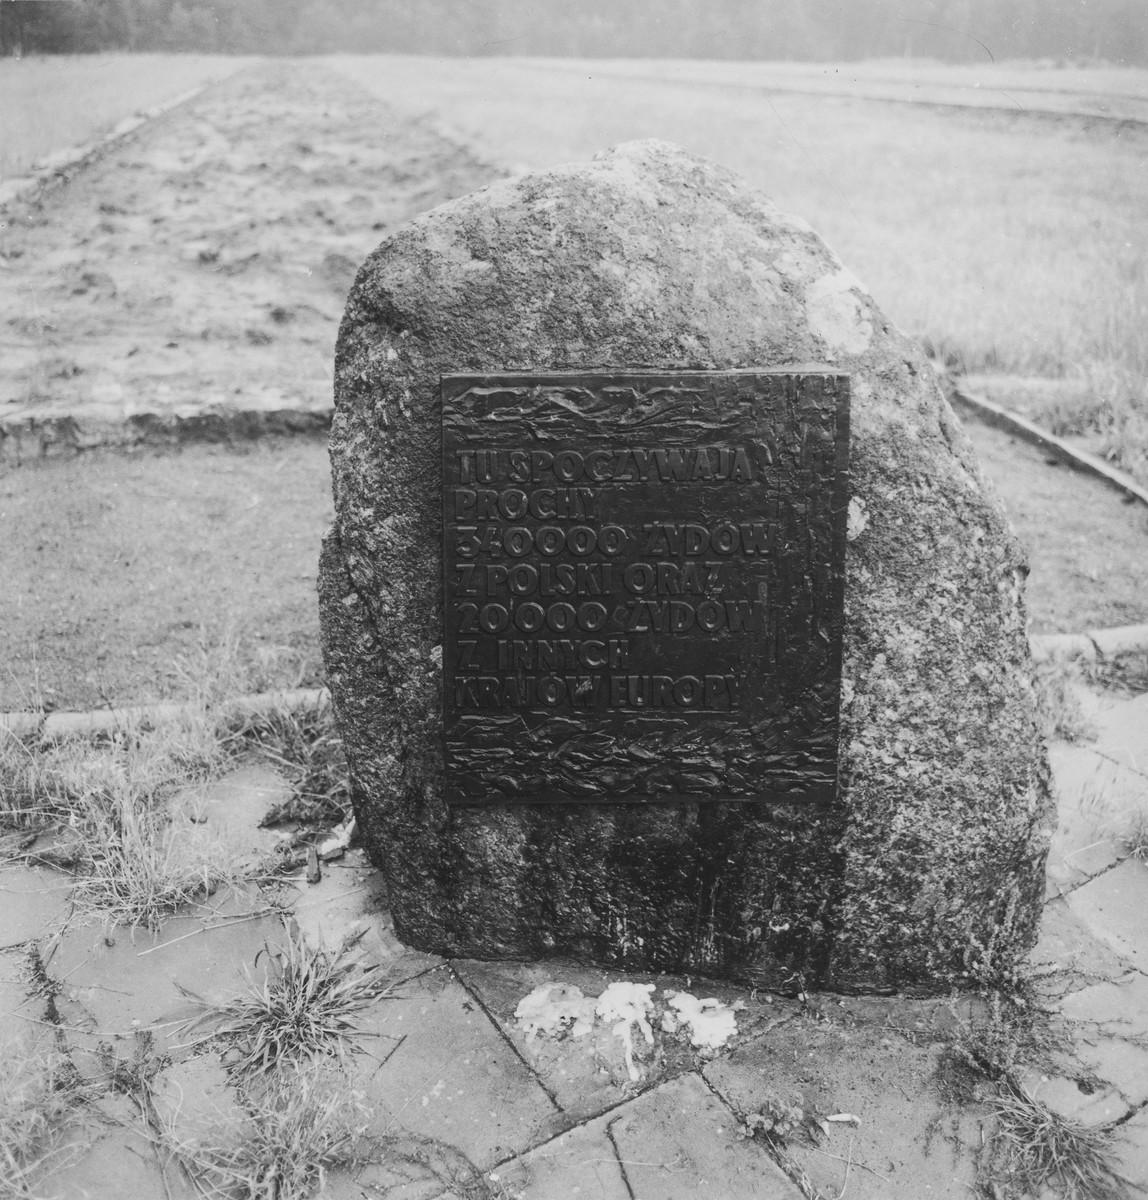 A stone memorial to the 340,000 Polish and 20,000 other Jews murdered in the Chelmno death camp.